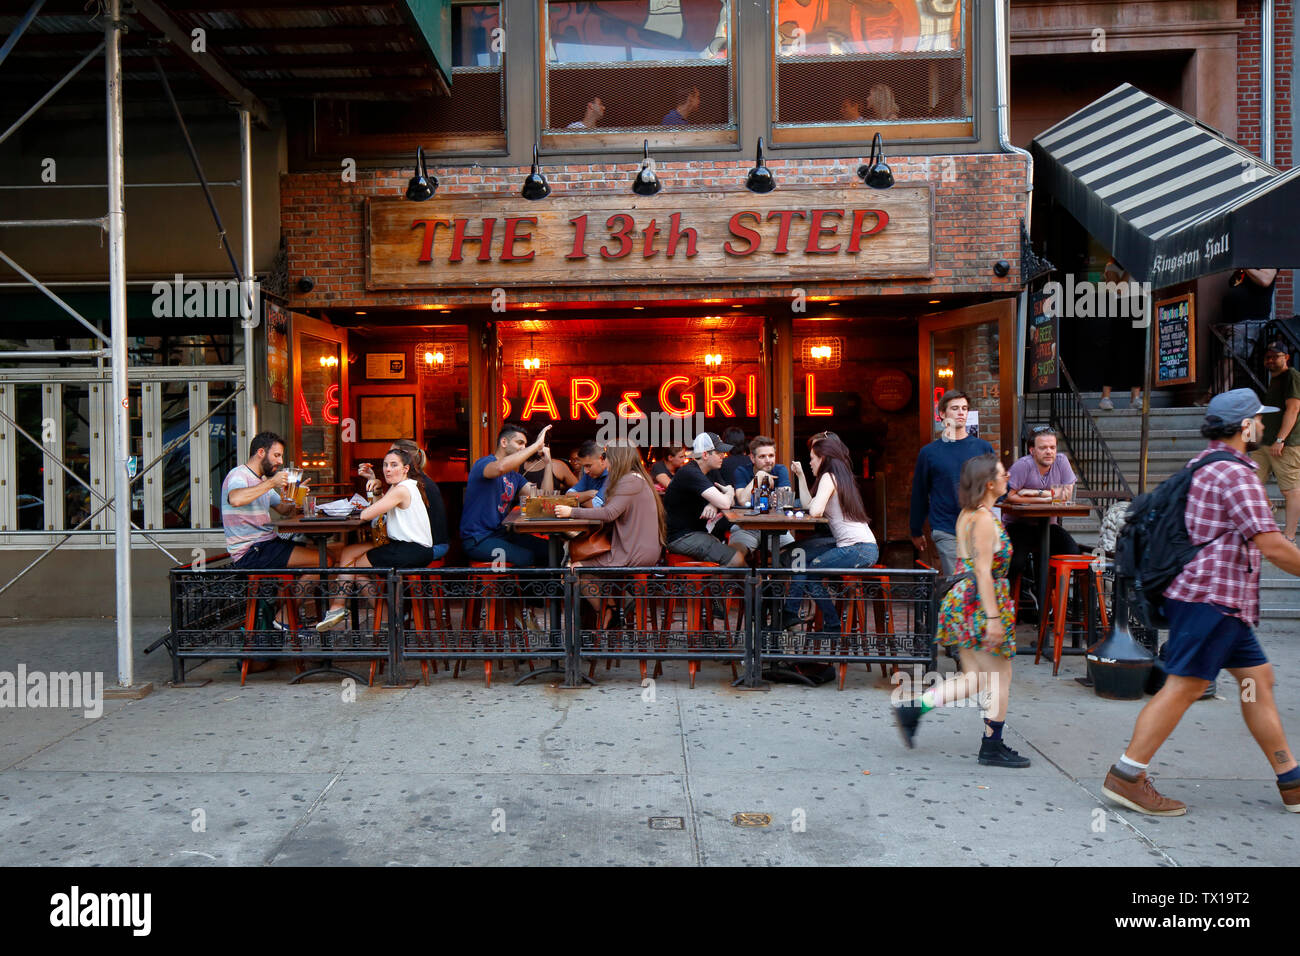 The 13th Step, Kingston Hall, 149 2nd Avenue, New York, NY. exterior storefront of a sports bar in the East Village neighborhood of Manhattan. Stock Photo